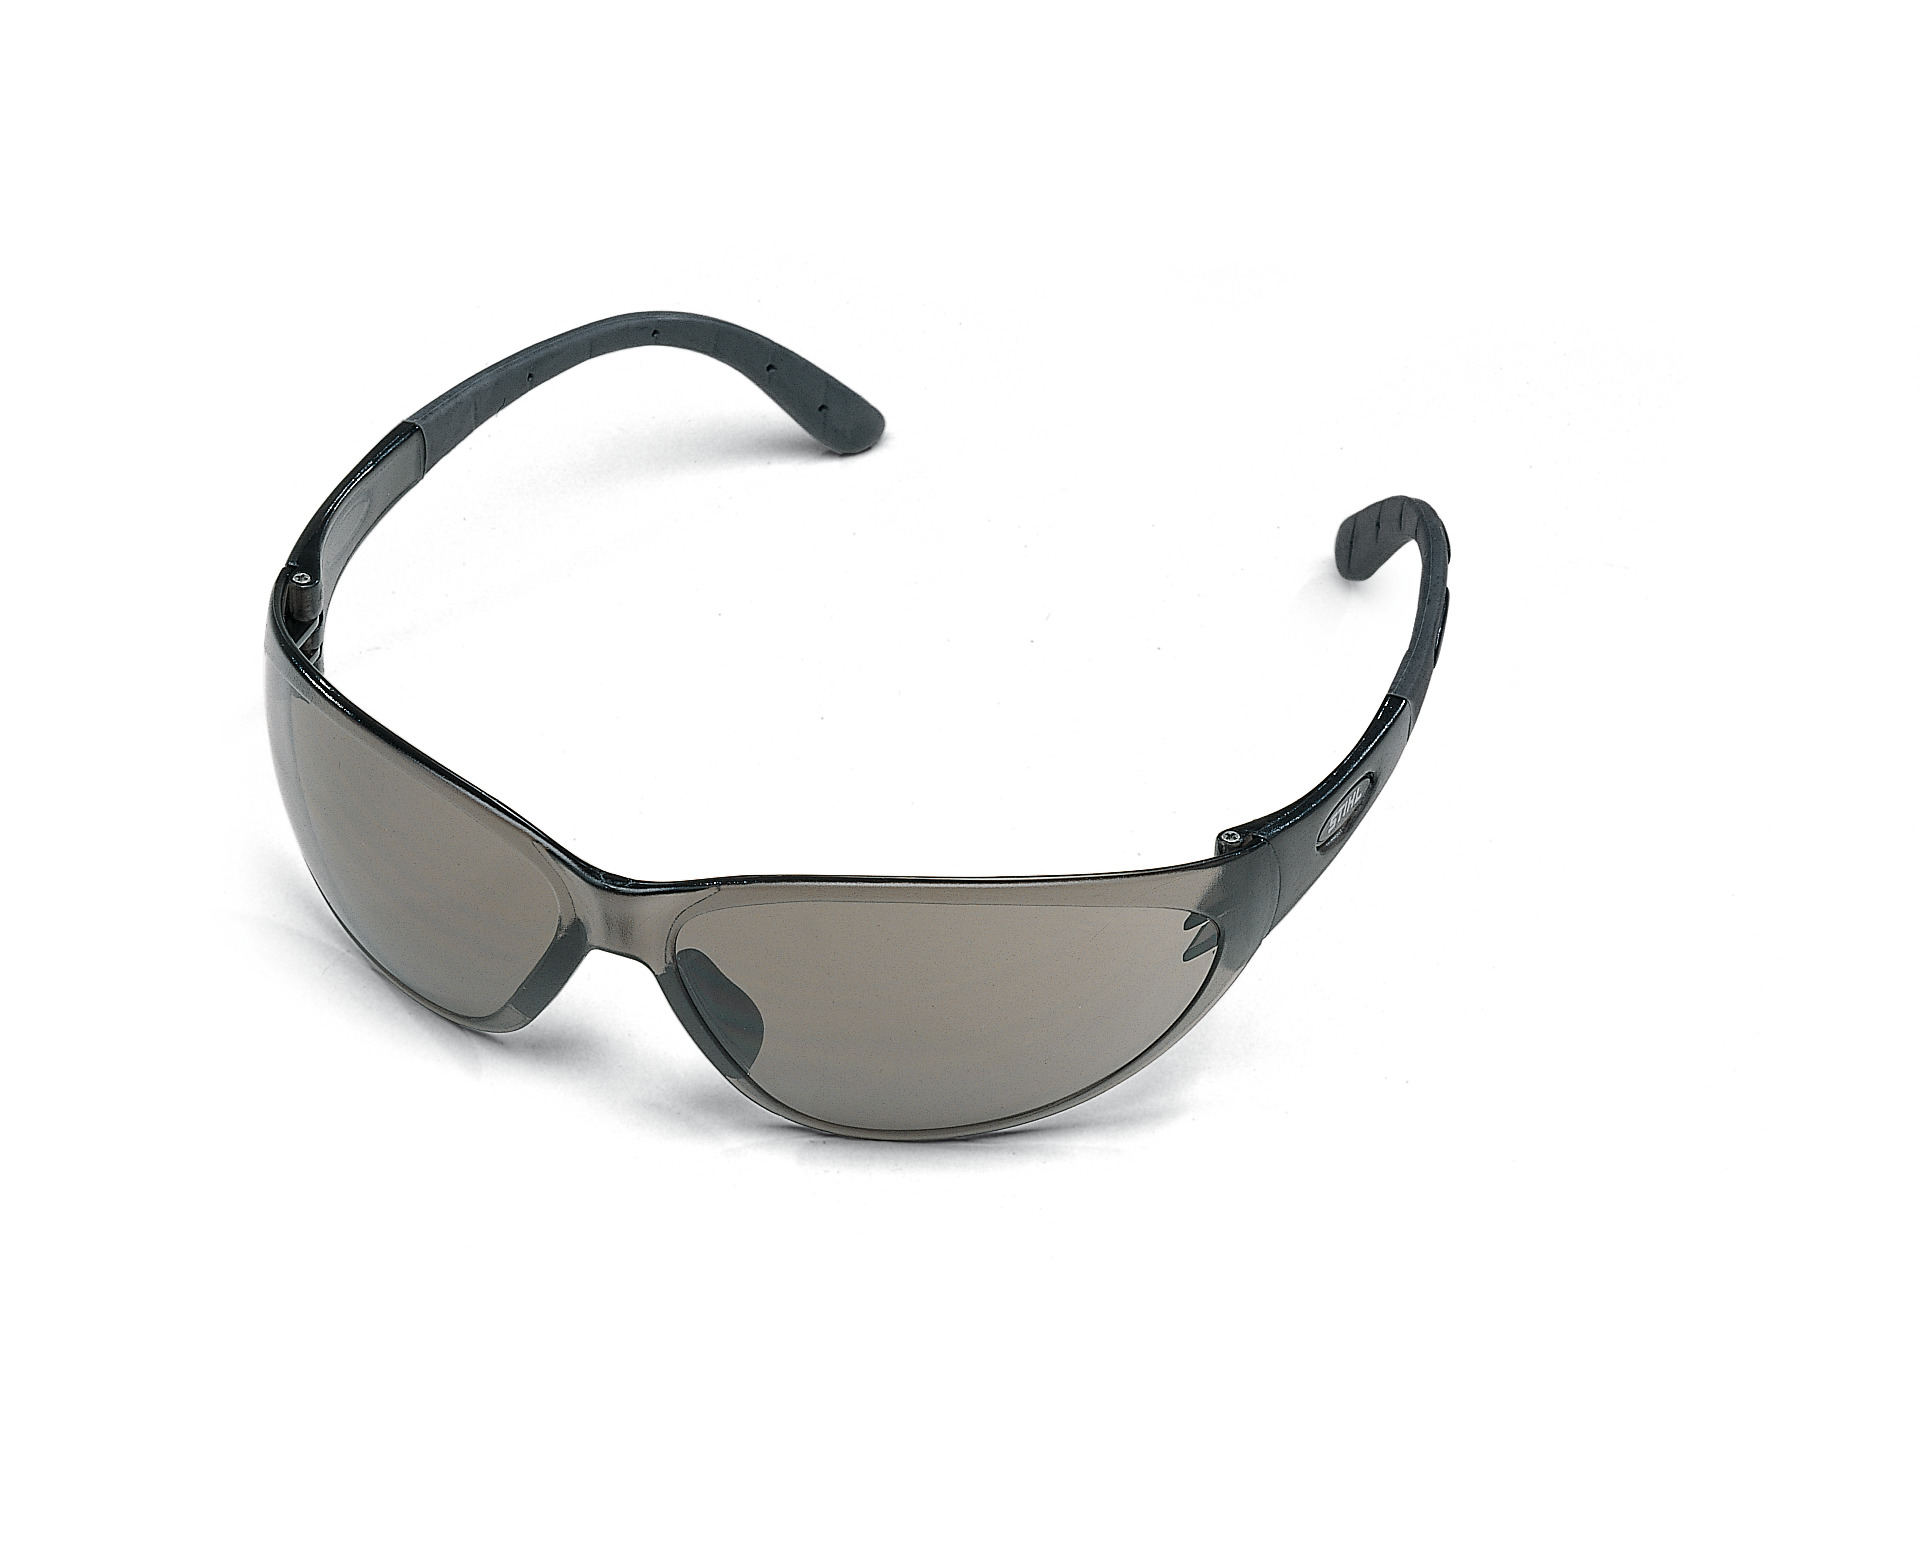 Contrast safety glasses - tinted